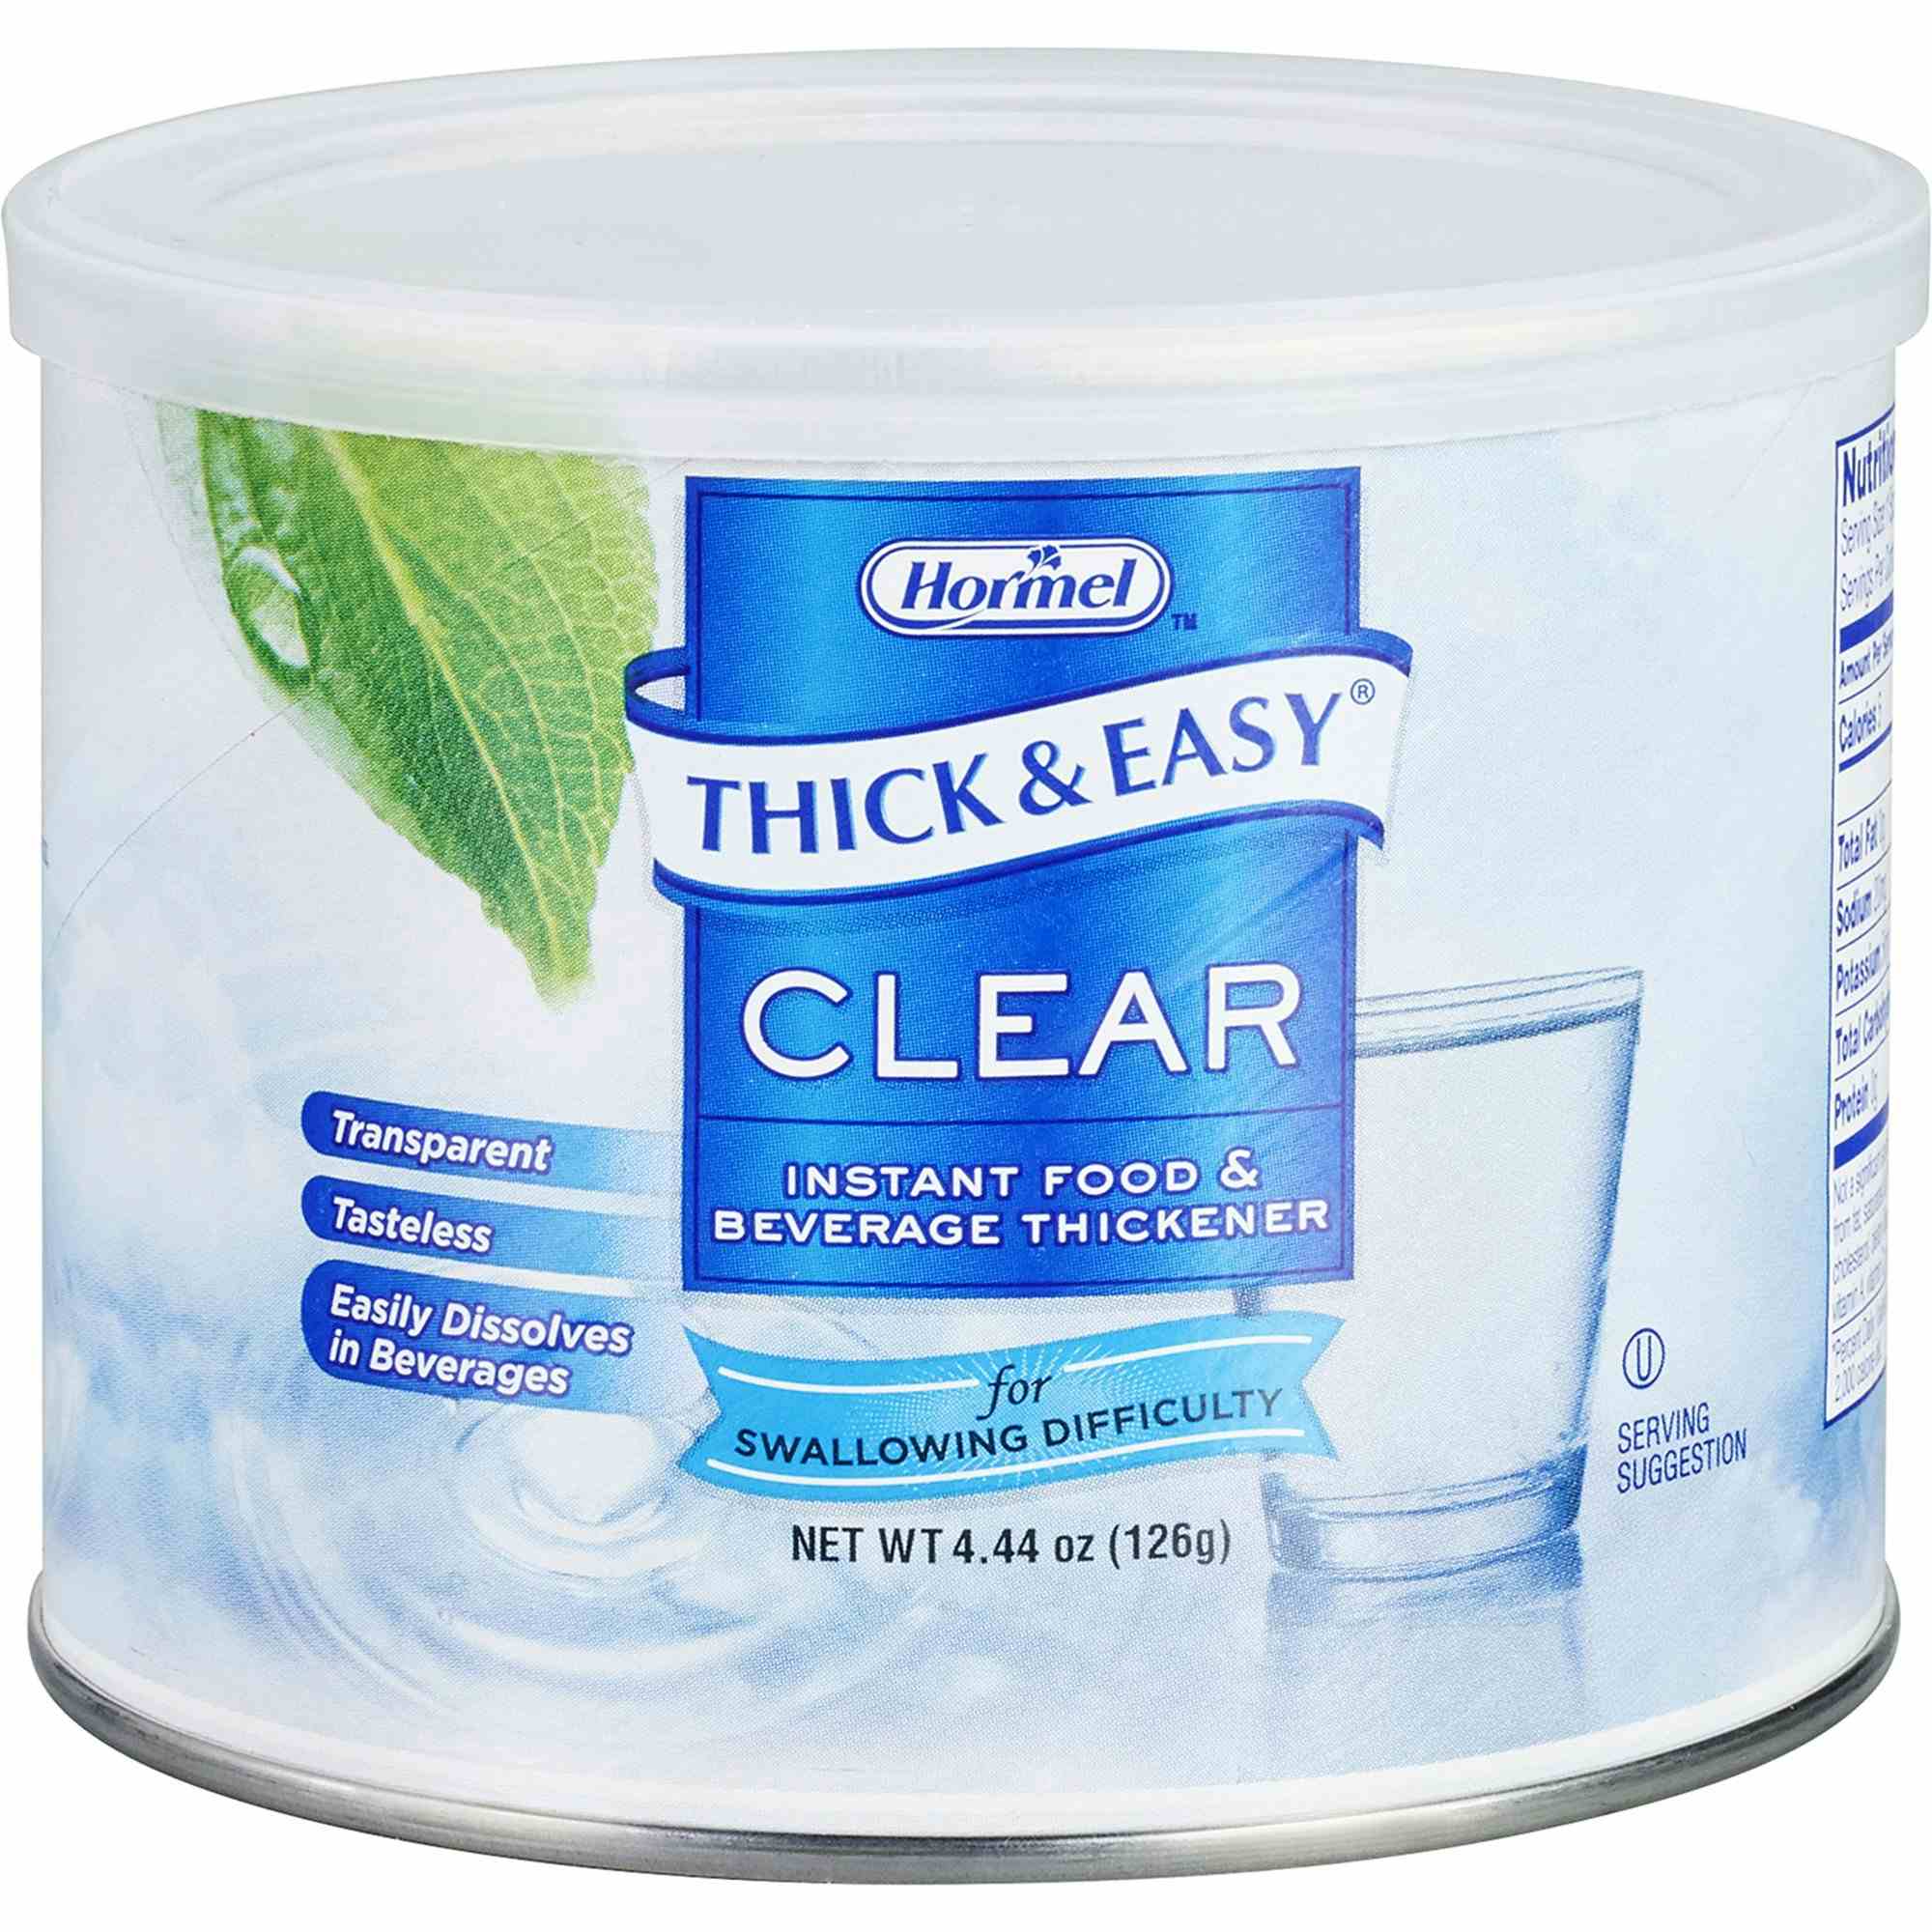 Thick & Easy Clear Food and Beverage Thickener, 4.4 oz. Canister, 25544, 1 Each